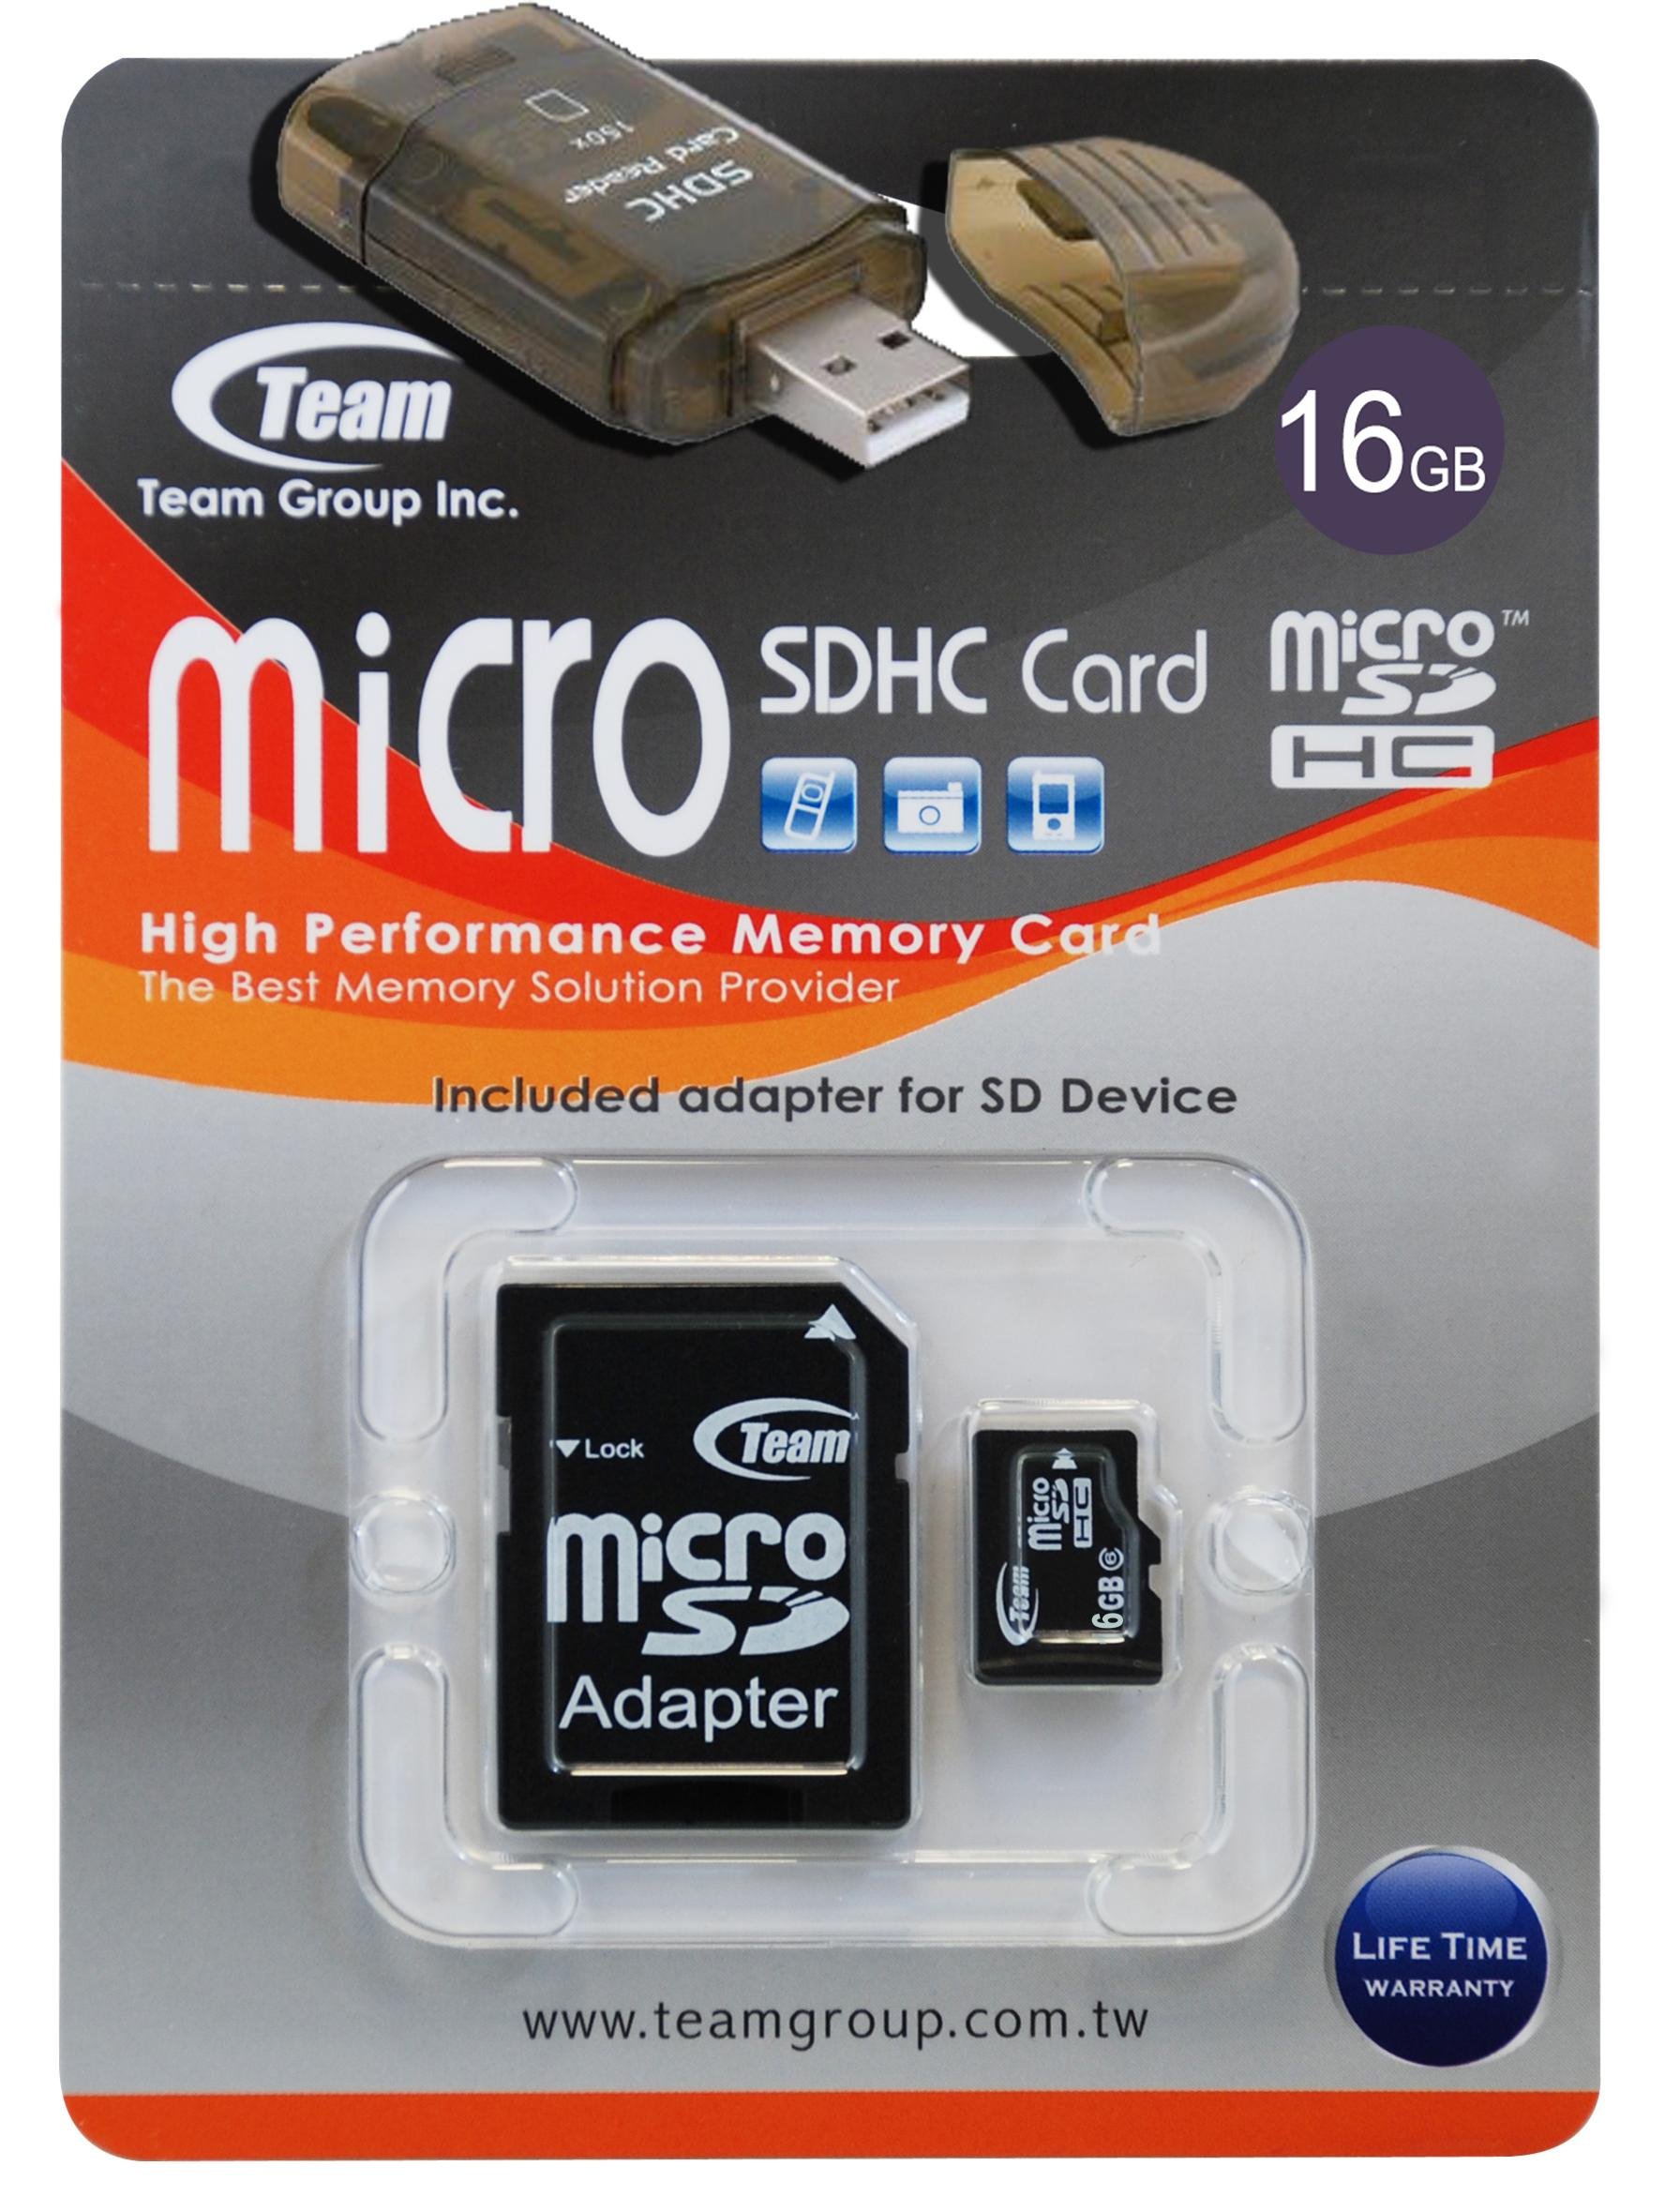 16GB Turbo Speed Class 6 MicroSDHC Memory Card For NOKIA E72 E75 N78 N79 N81. High Speed Card Comes with a free SD and USB Ad